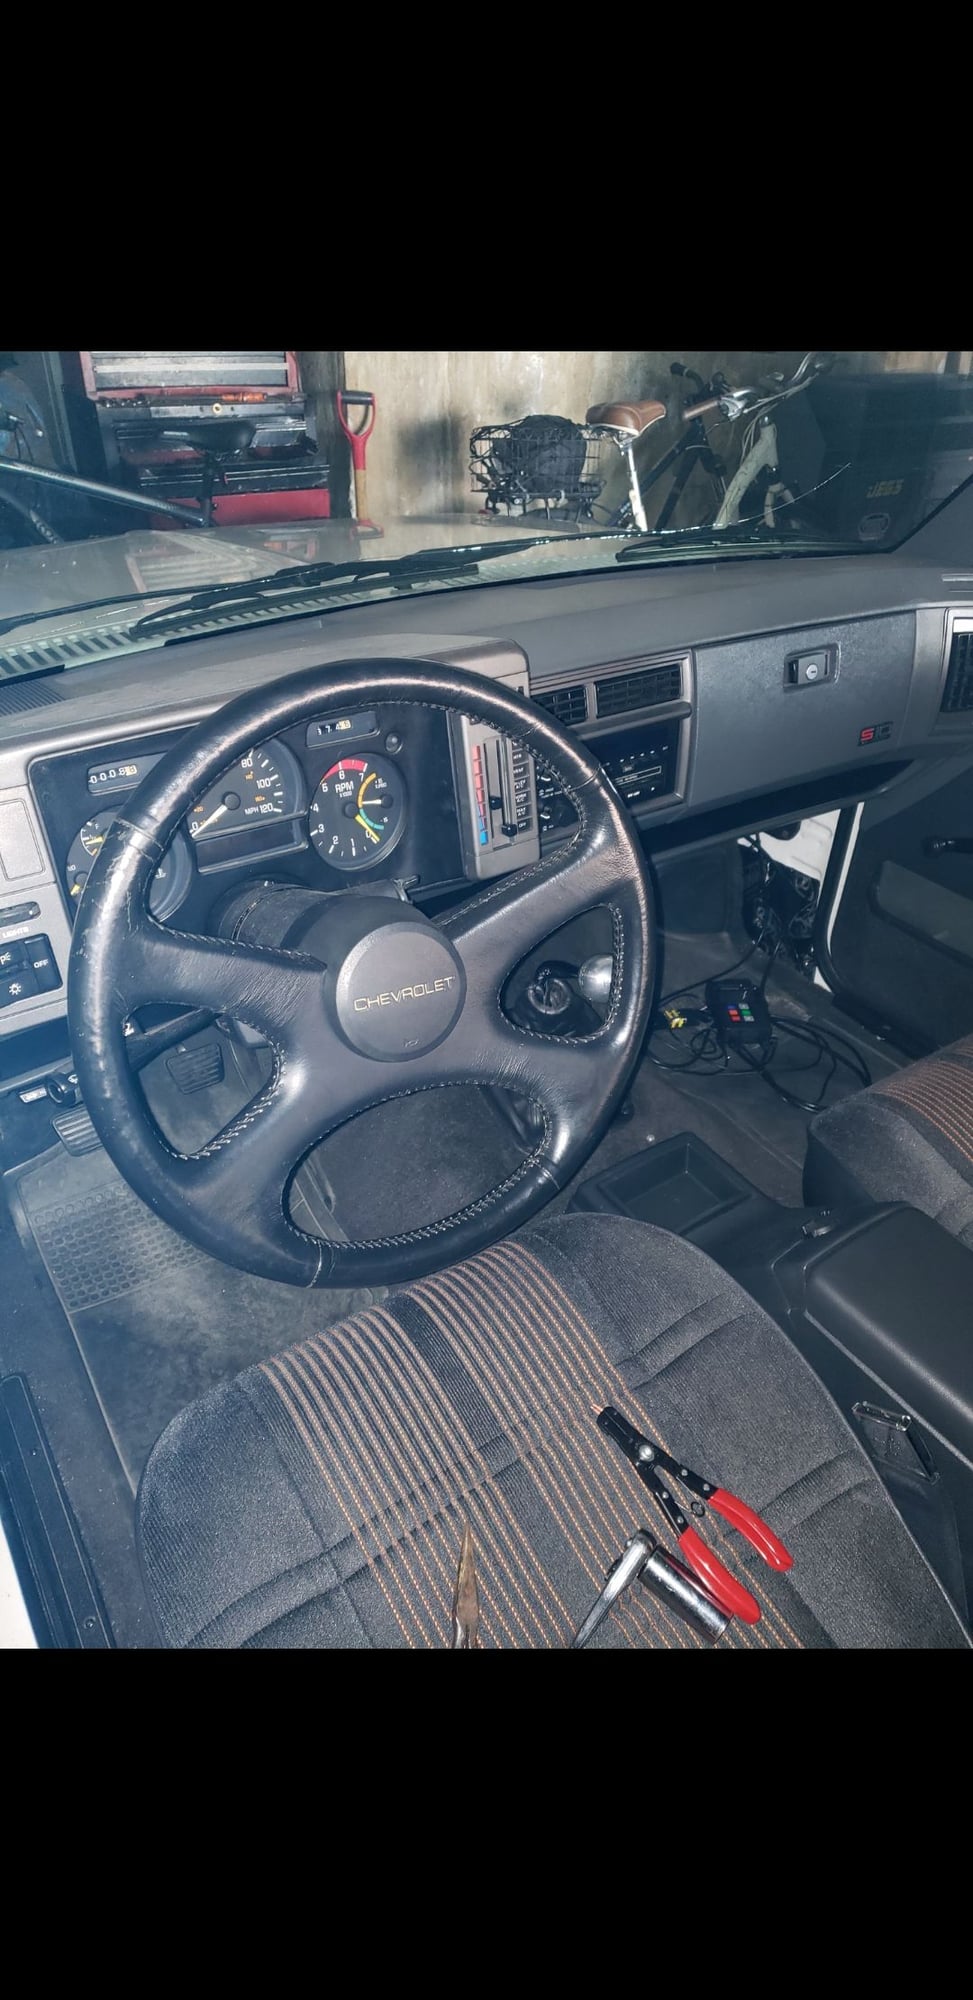 1992 Chevrolet S10 - Iron 408 stroker LS t56 magnum - Long Island, NY 11757, United States